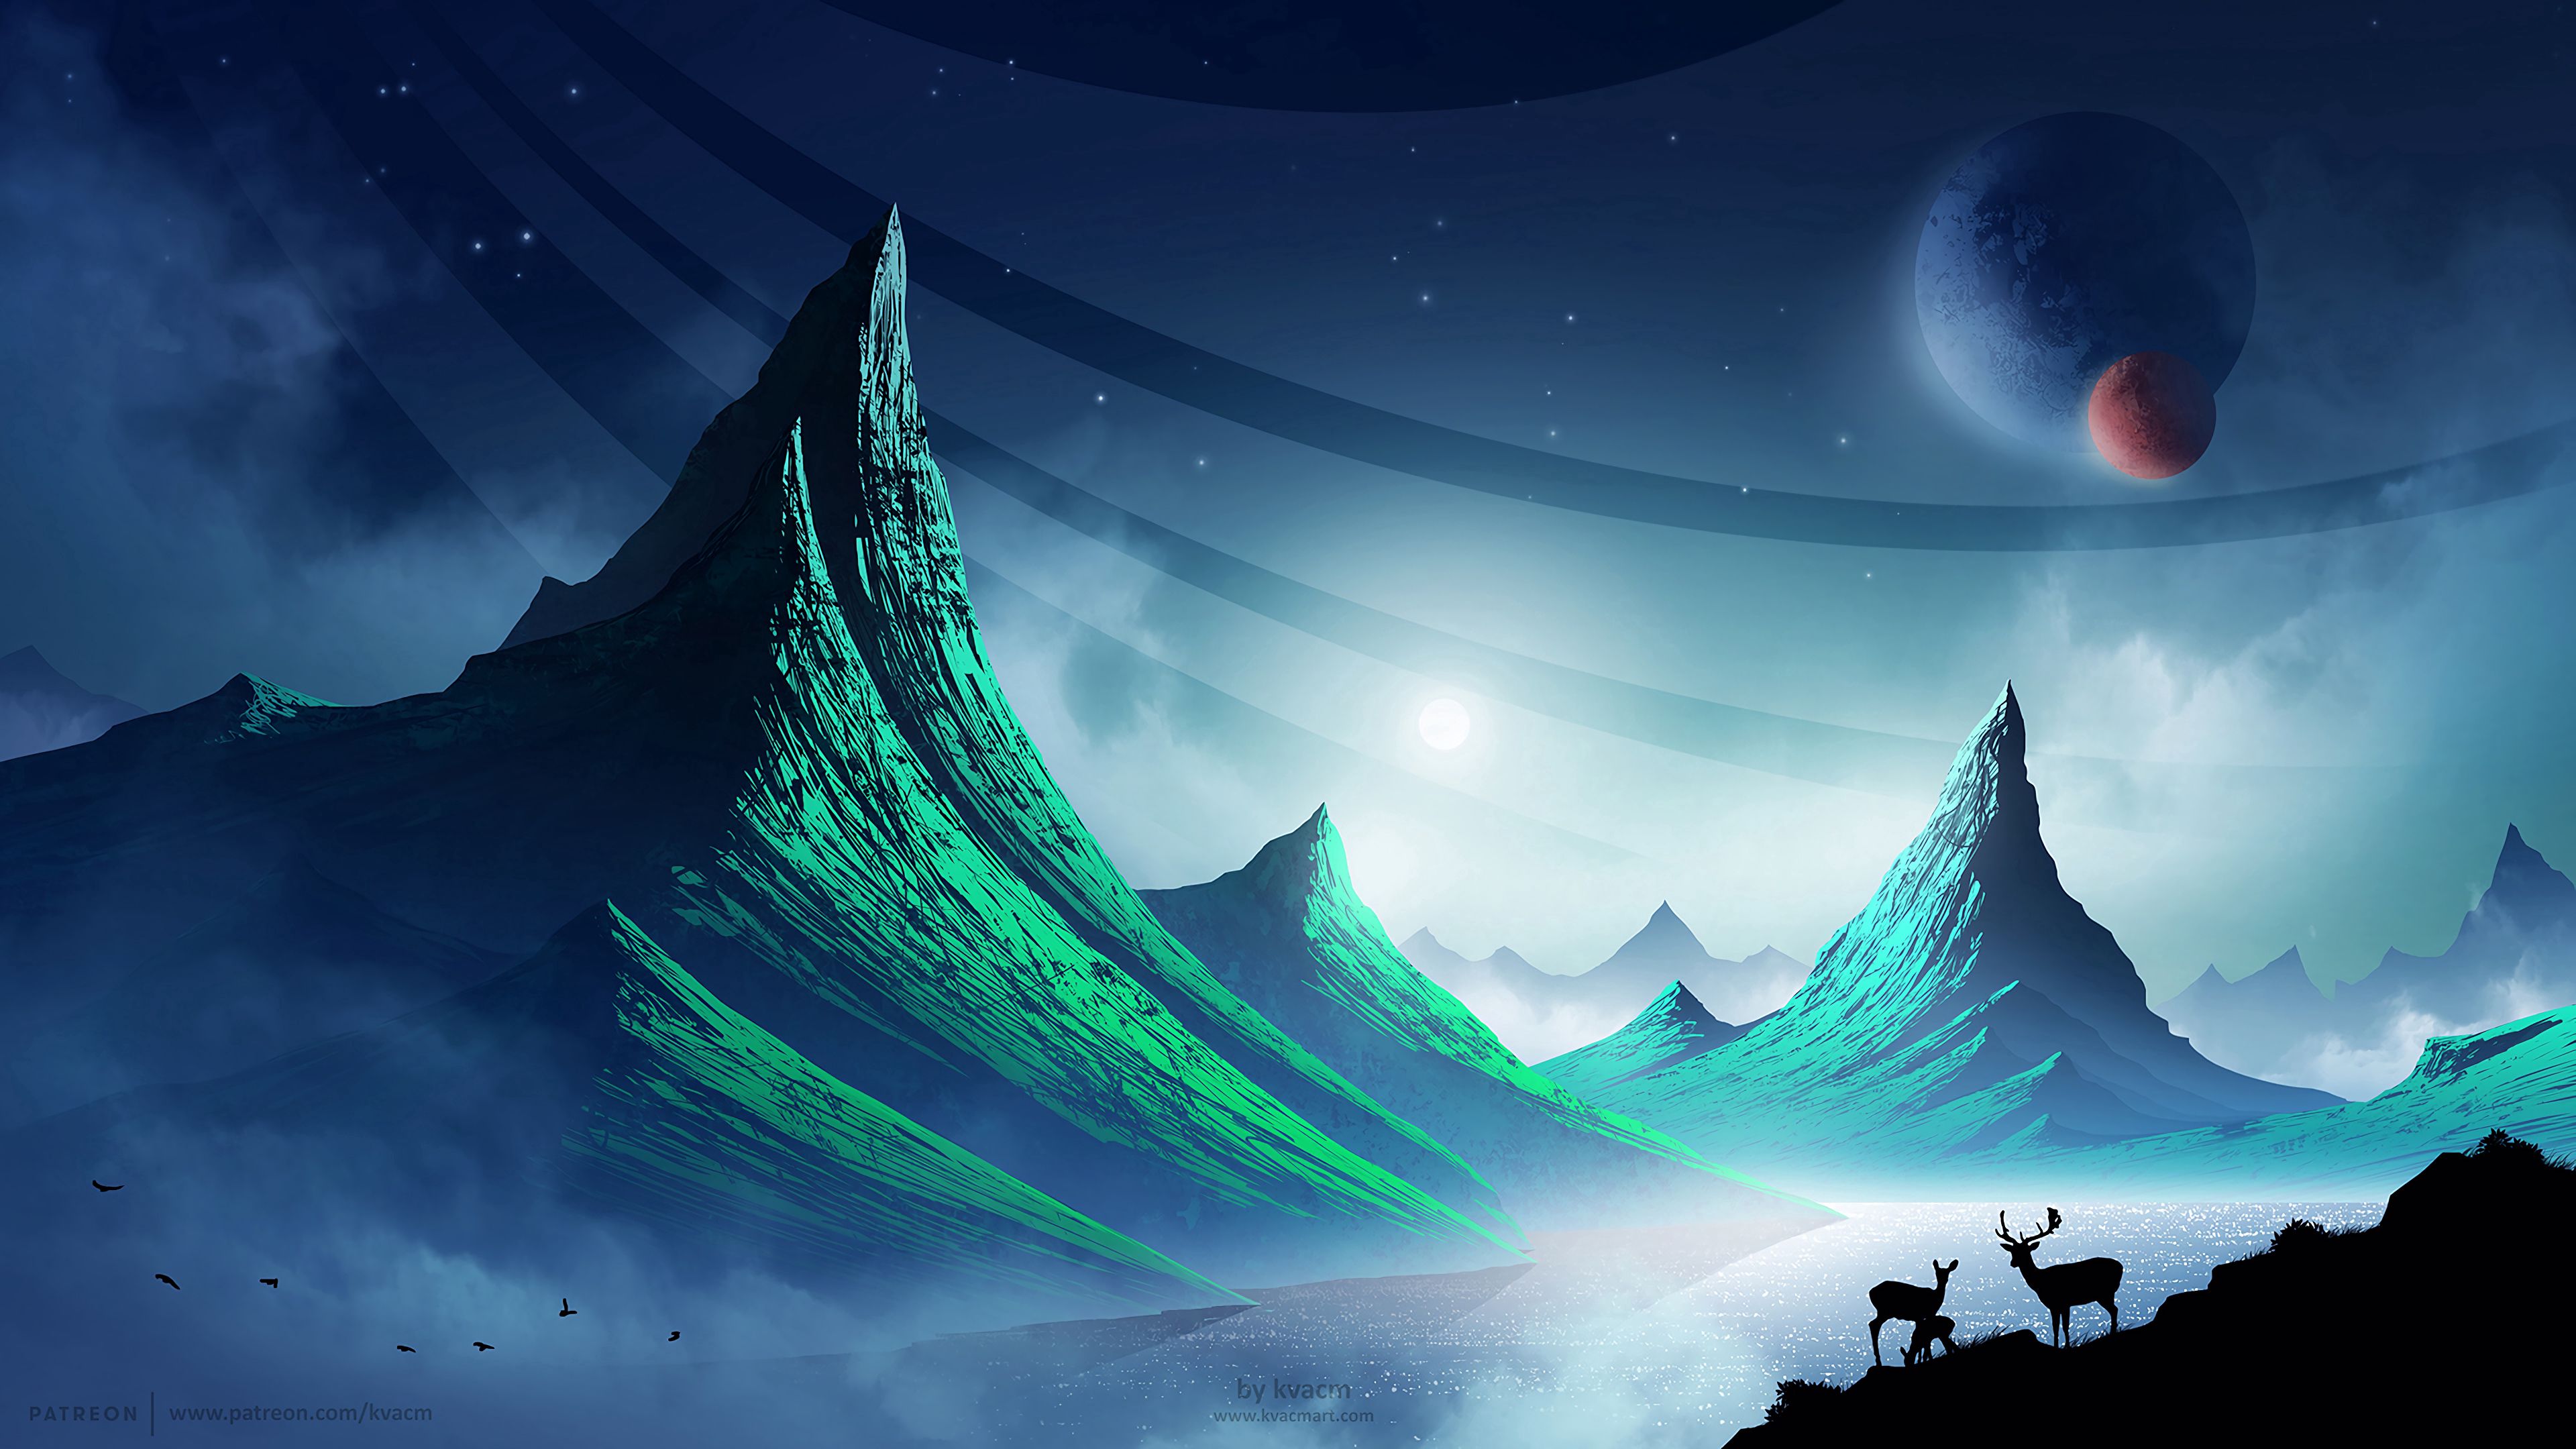 deers, space, art, cosmic, landscape, mountains, night phone background